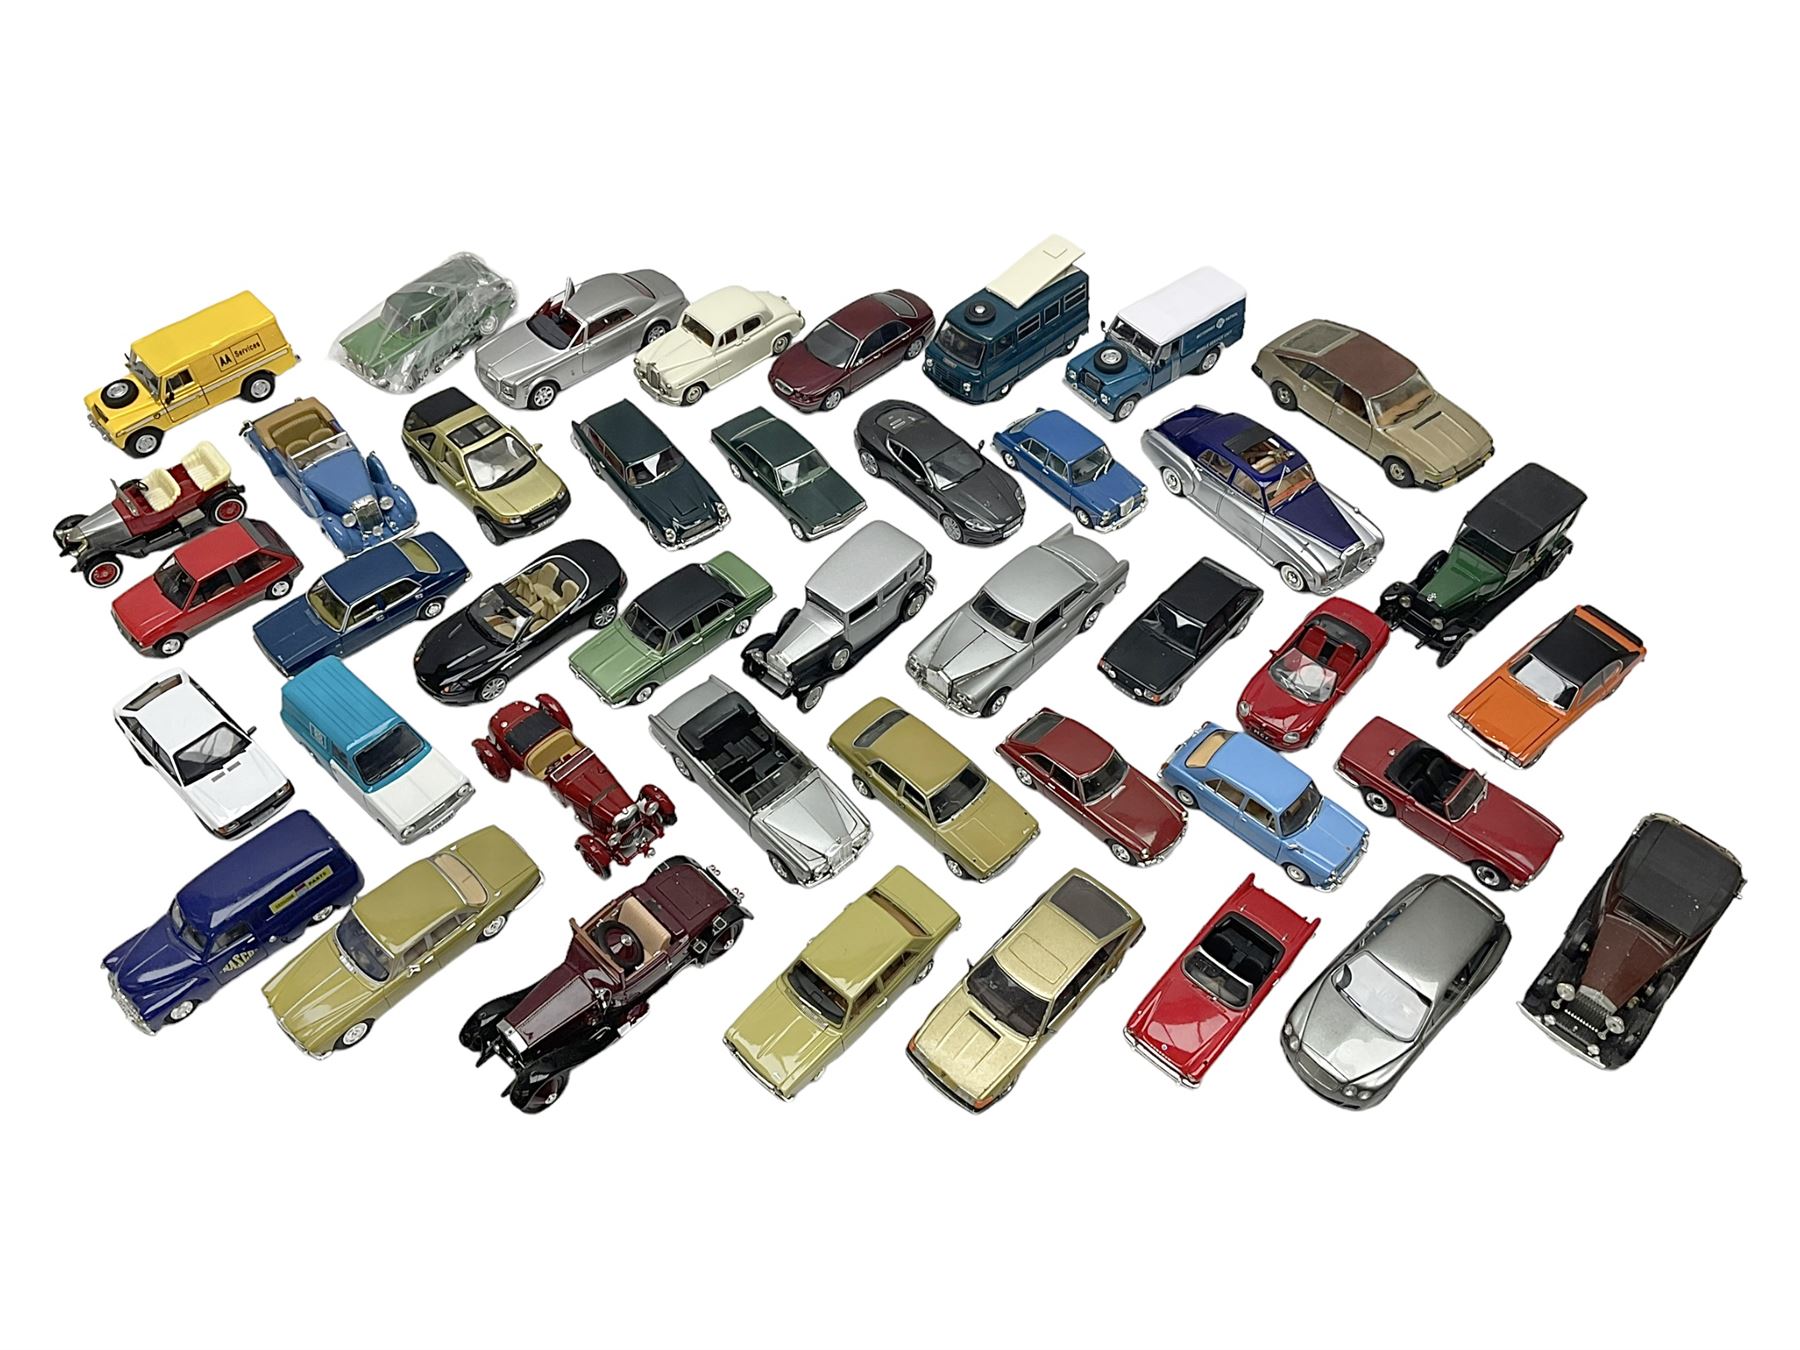 Over forty modern die-cast models by Vanguards